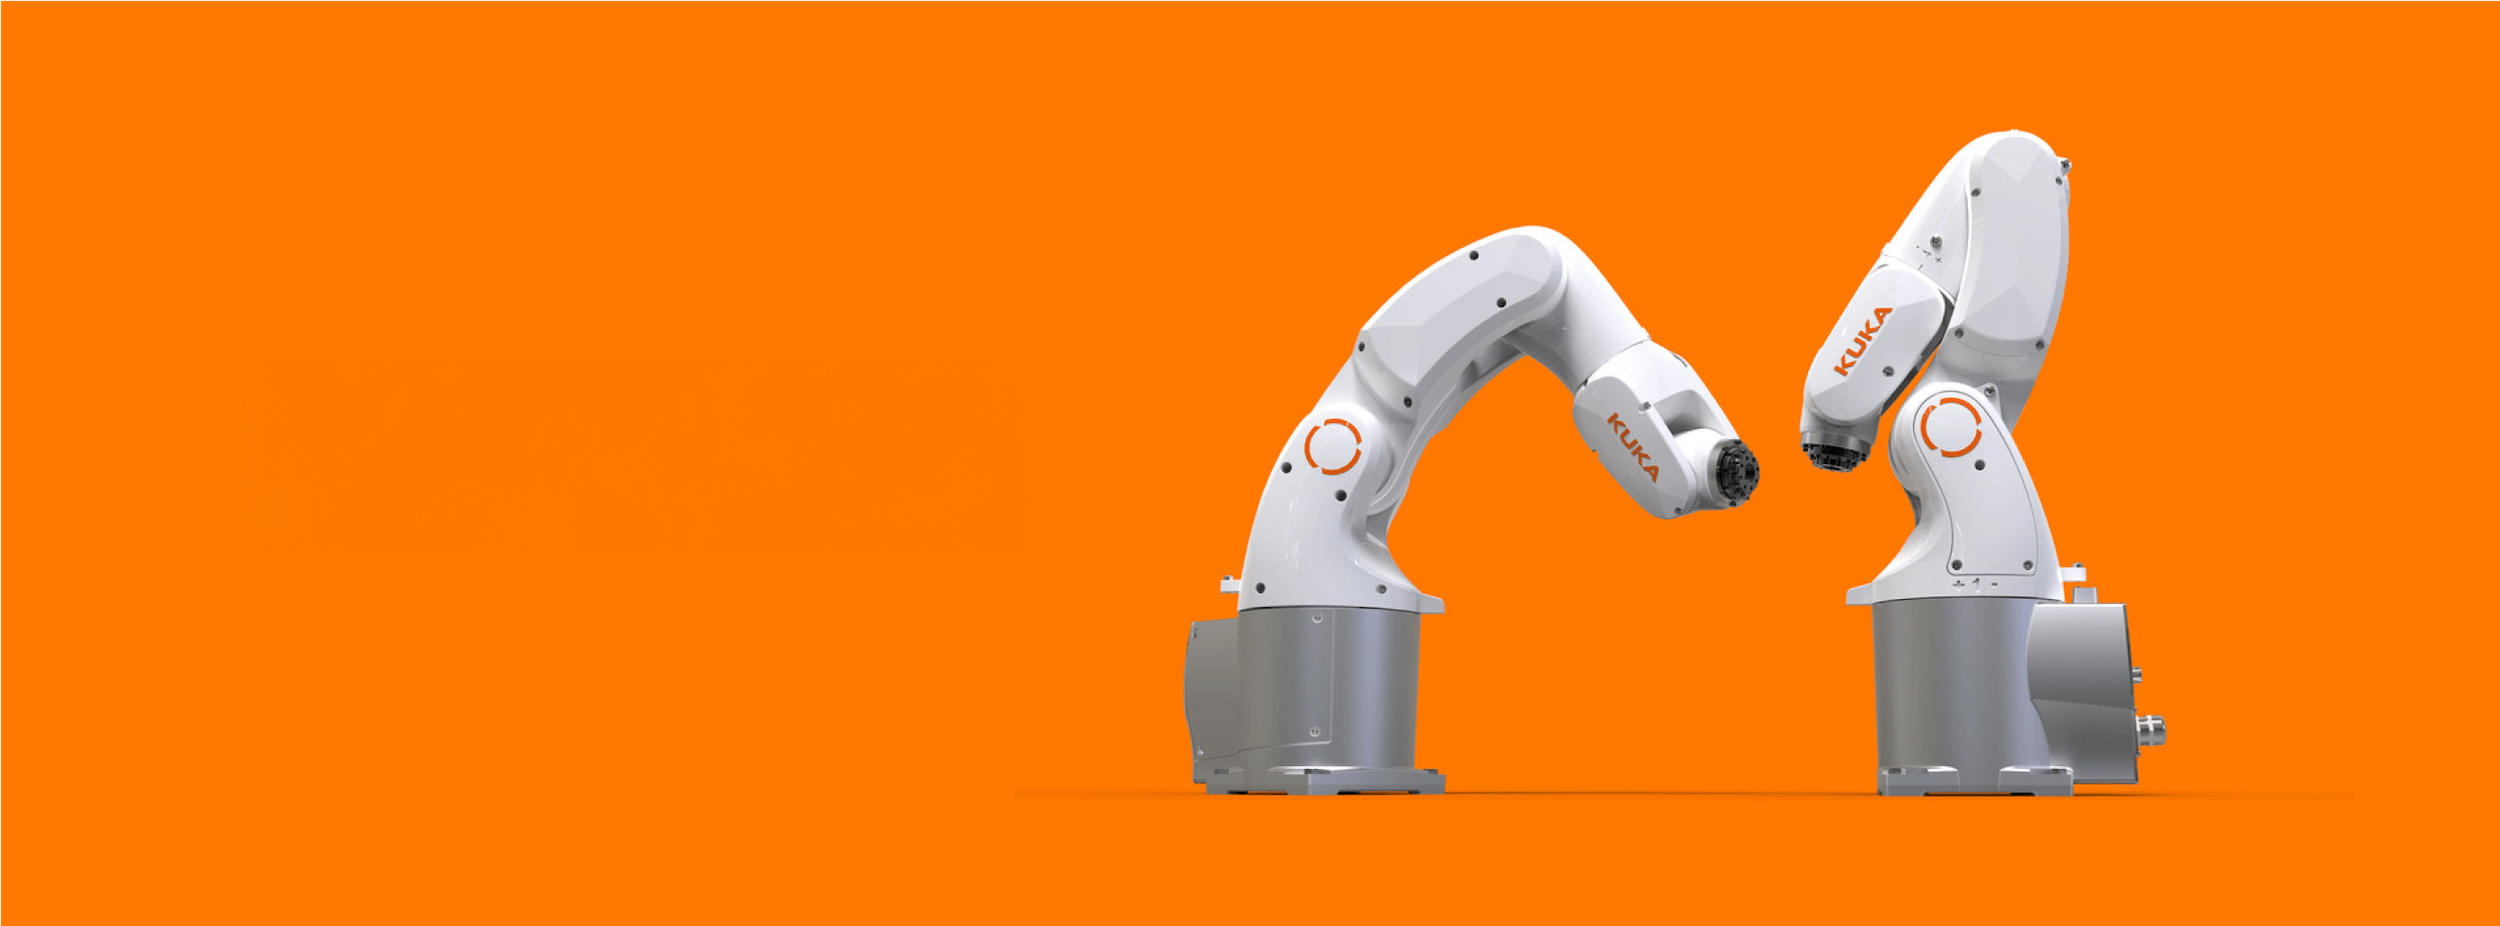 two white robotic manufacturing arms on an orange background